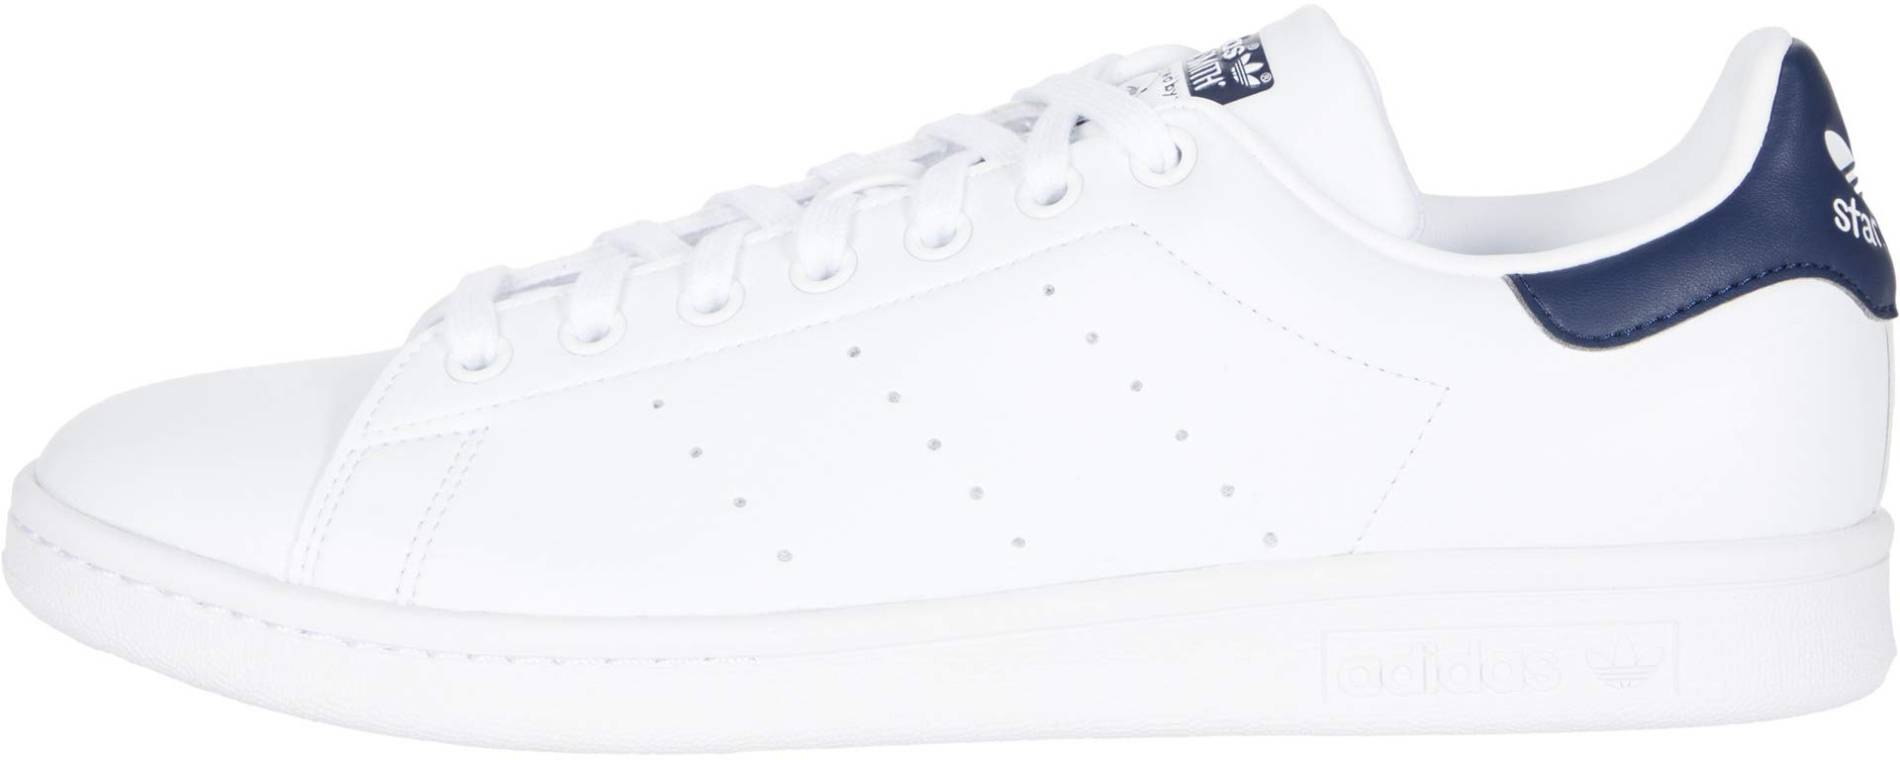 stan smith size up or down